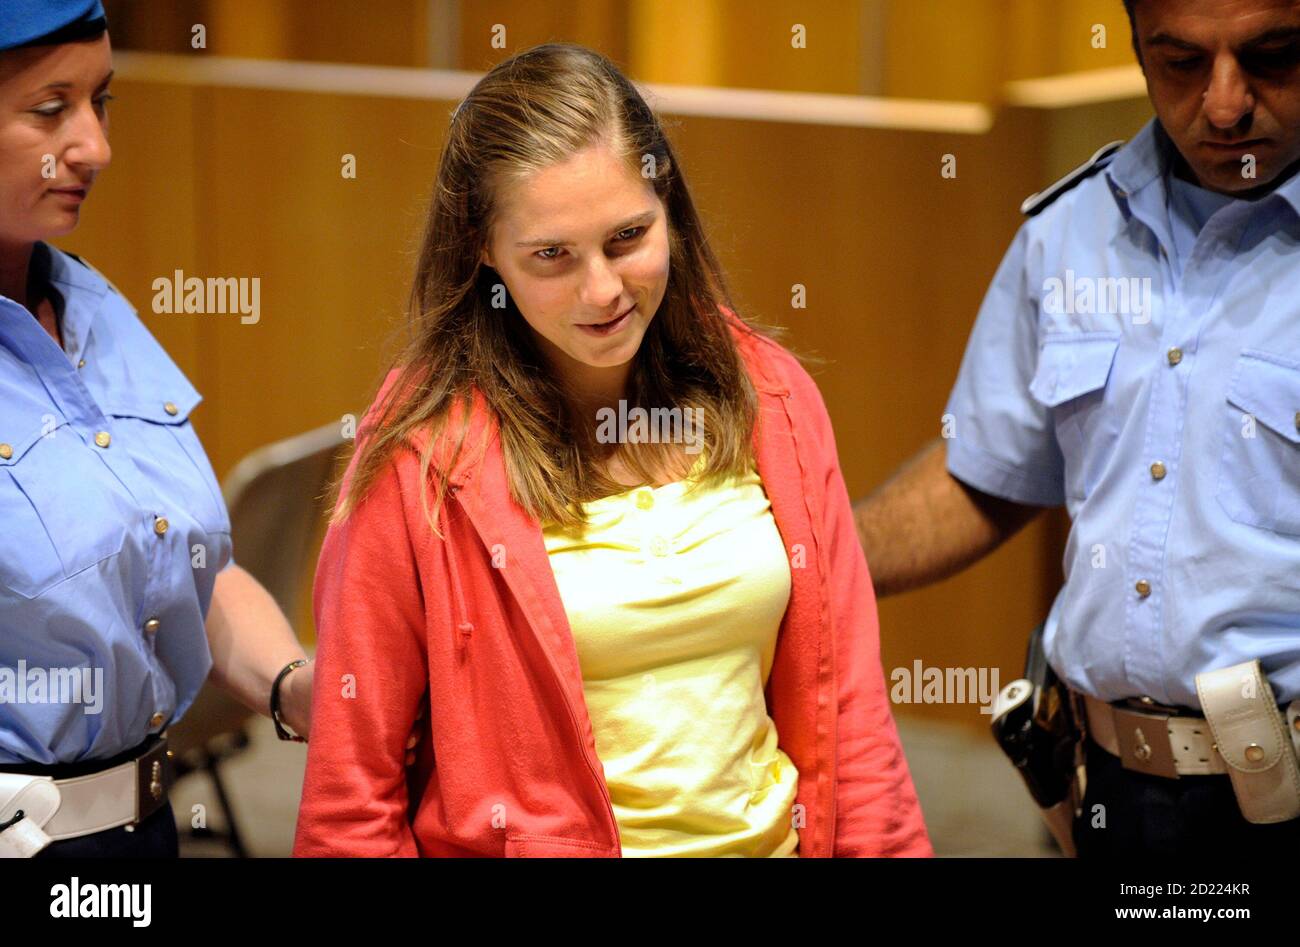 Jailed murder suspect Amanda Knox (C) of the U.S. attends the resumption of her trial for murder, after a summer recess, in Perugia September 14, 2009. Knox and Raffaele Sollecito of Italy are on trial for the November 2007 murder of British student Meredith Kercher. REUTERS/Daniele La Monaca        (ITALY CRIME LAW CONFLICT) Stock Photo